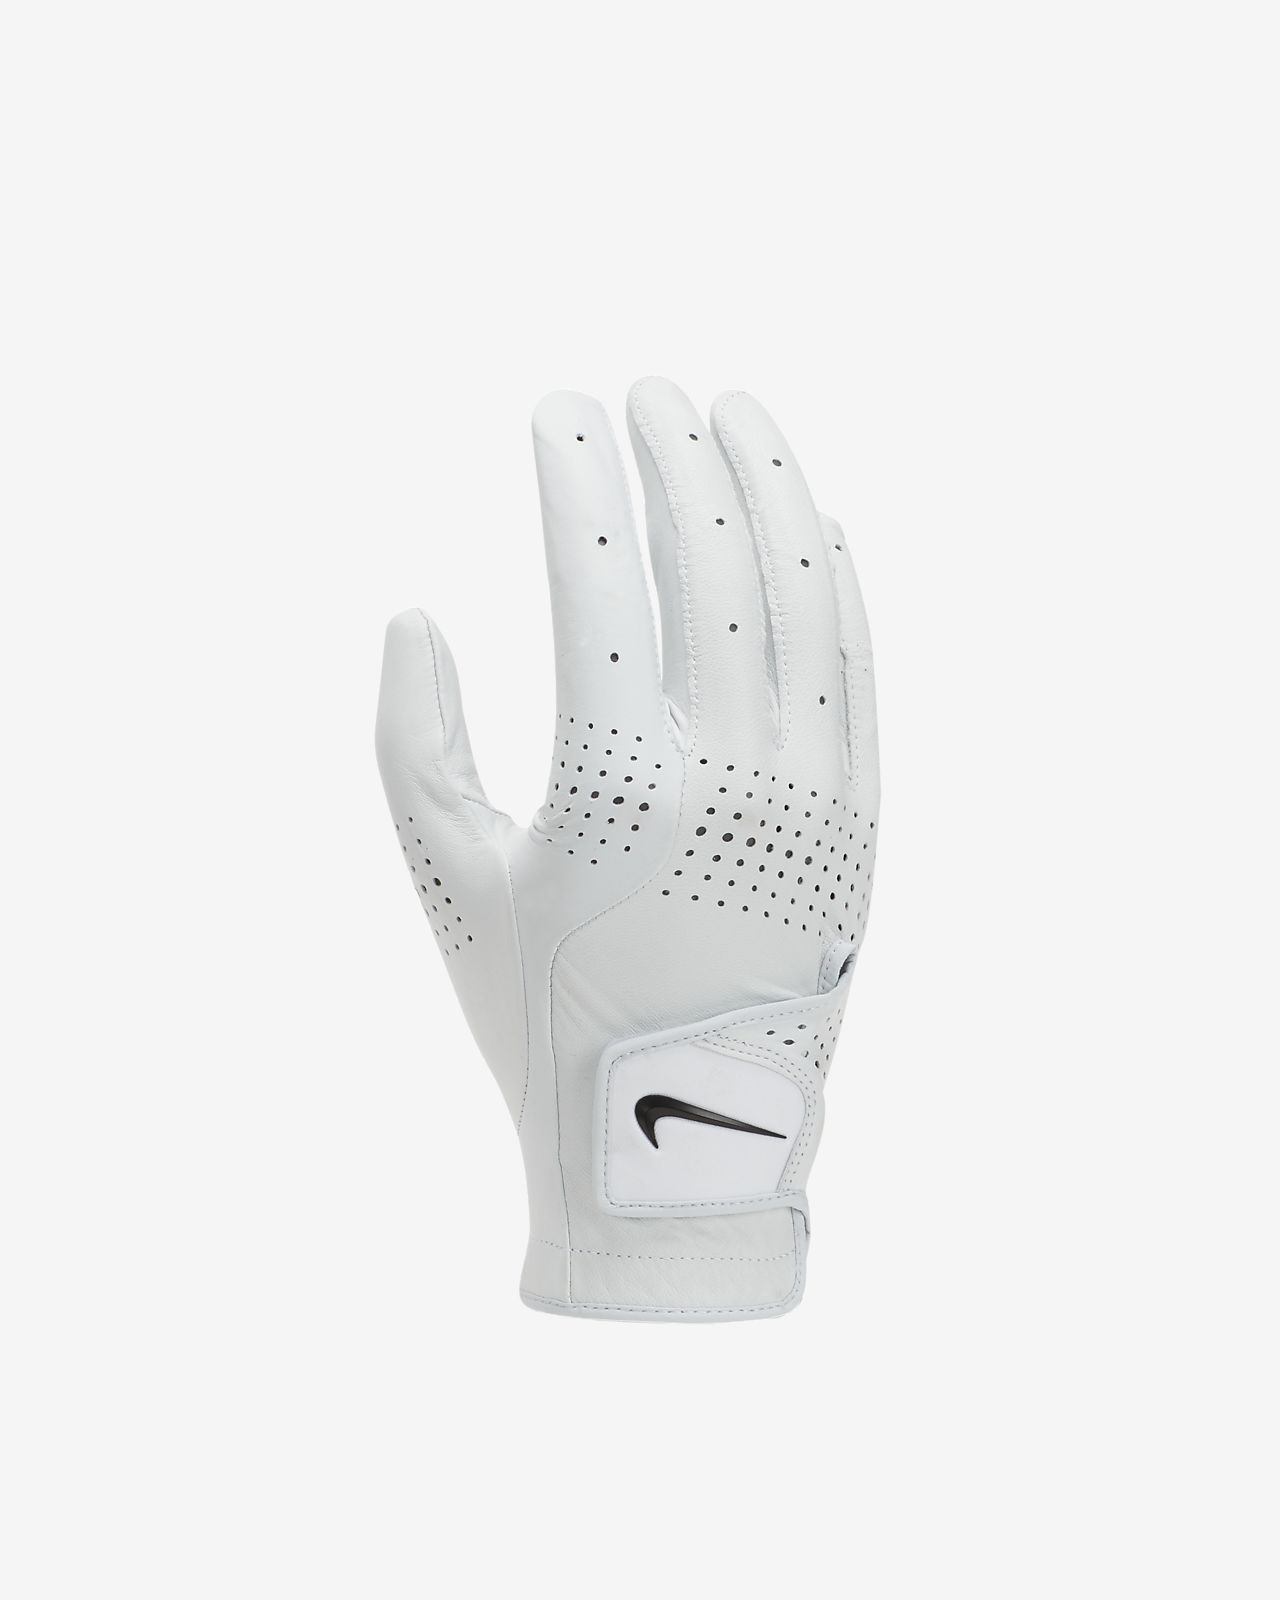 Black Nike Golf Glove Right Hand - Images Gloves and Descriptions ...